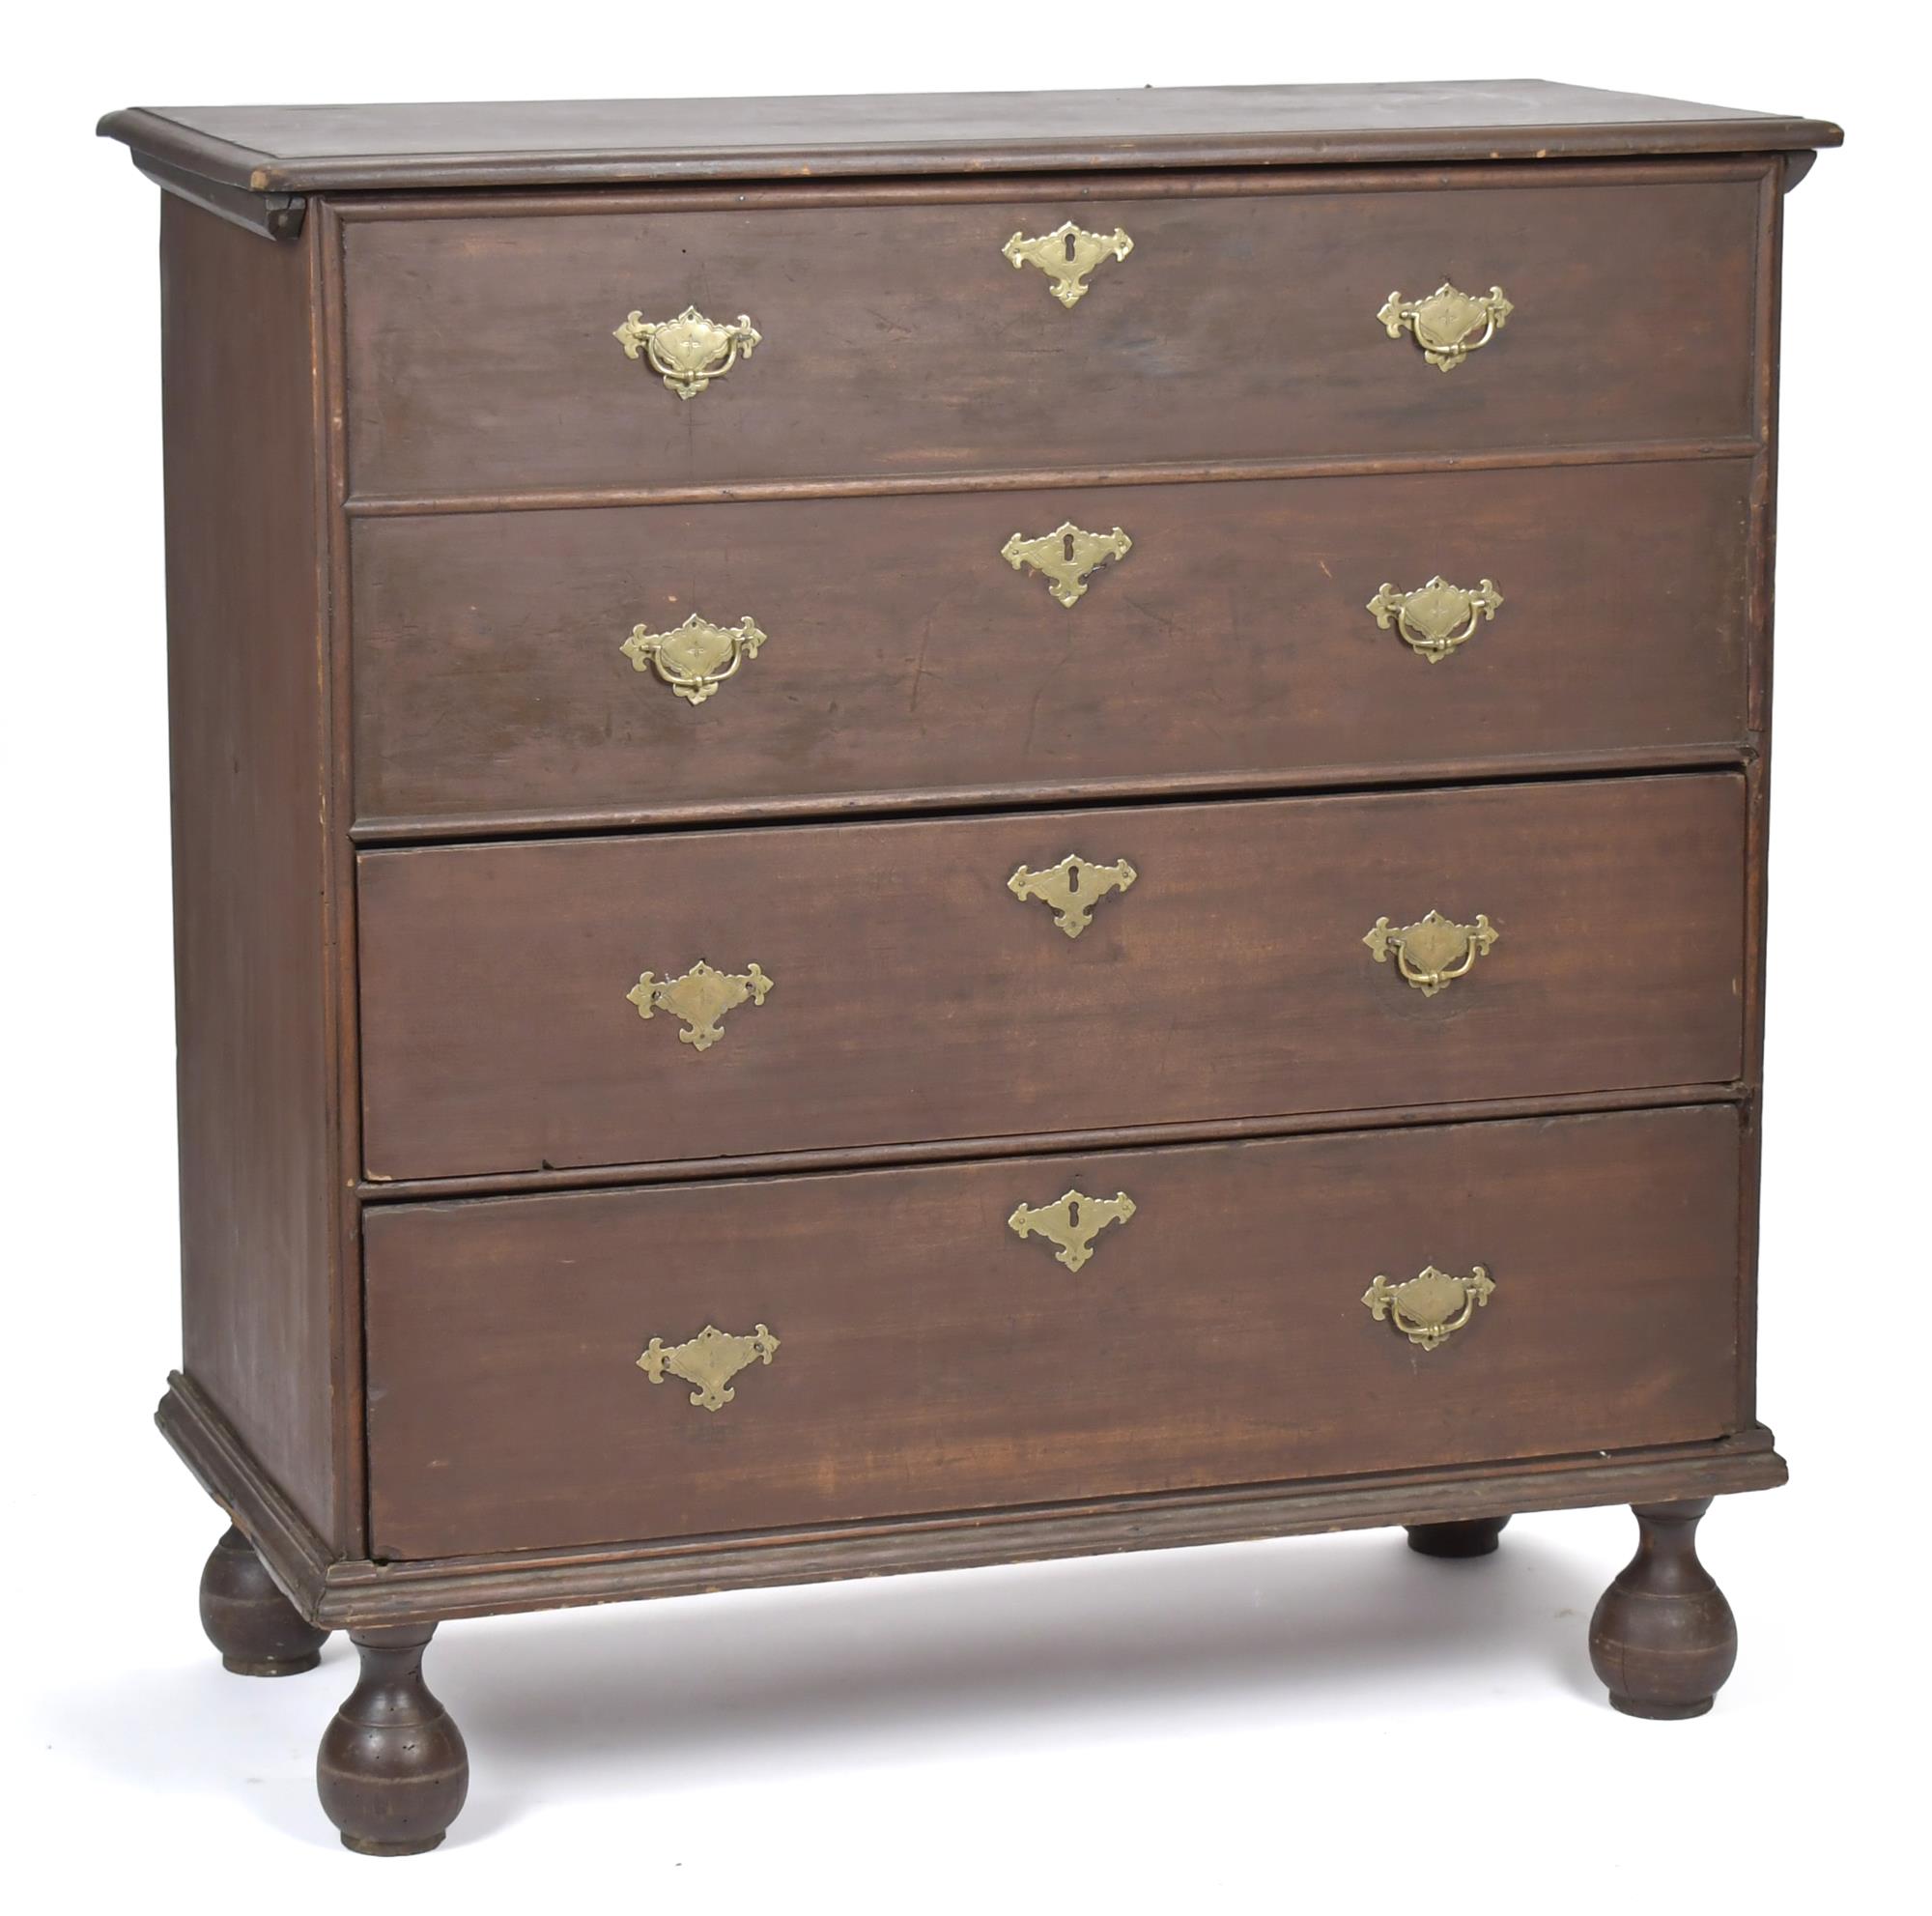 WM AND MARY BALL FOOT BLANKET CHEST  3ac84e